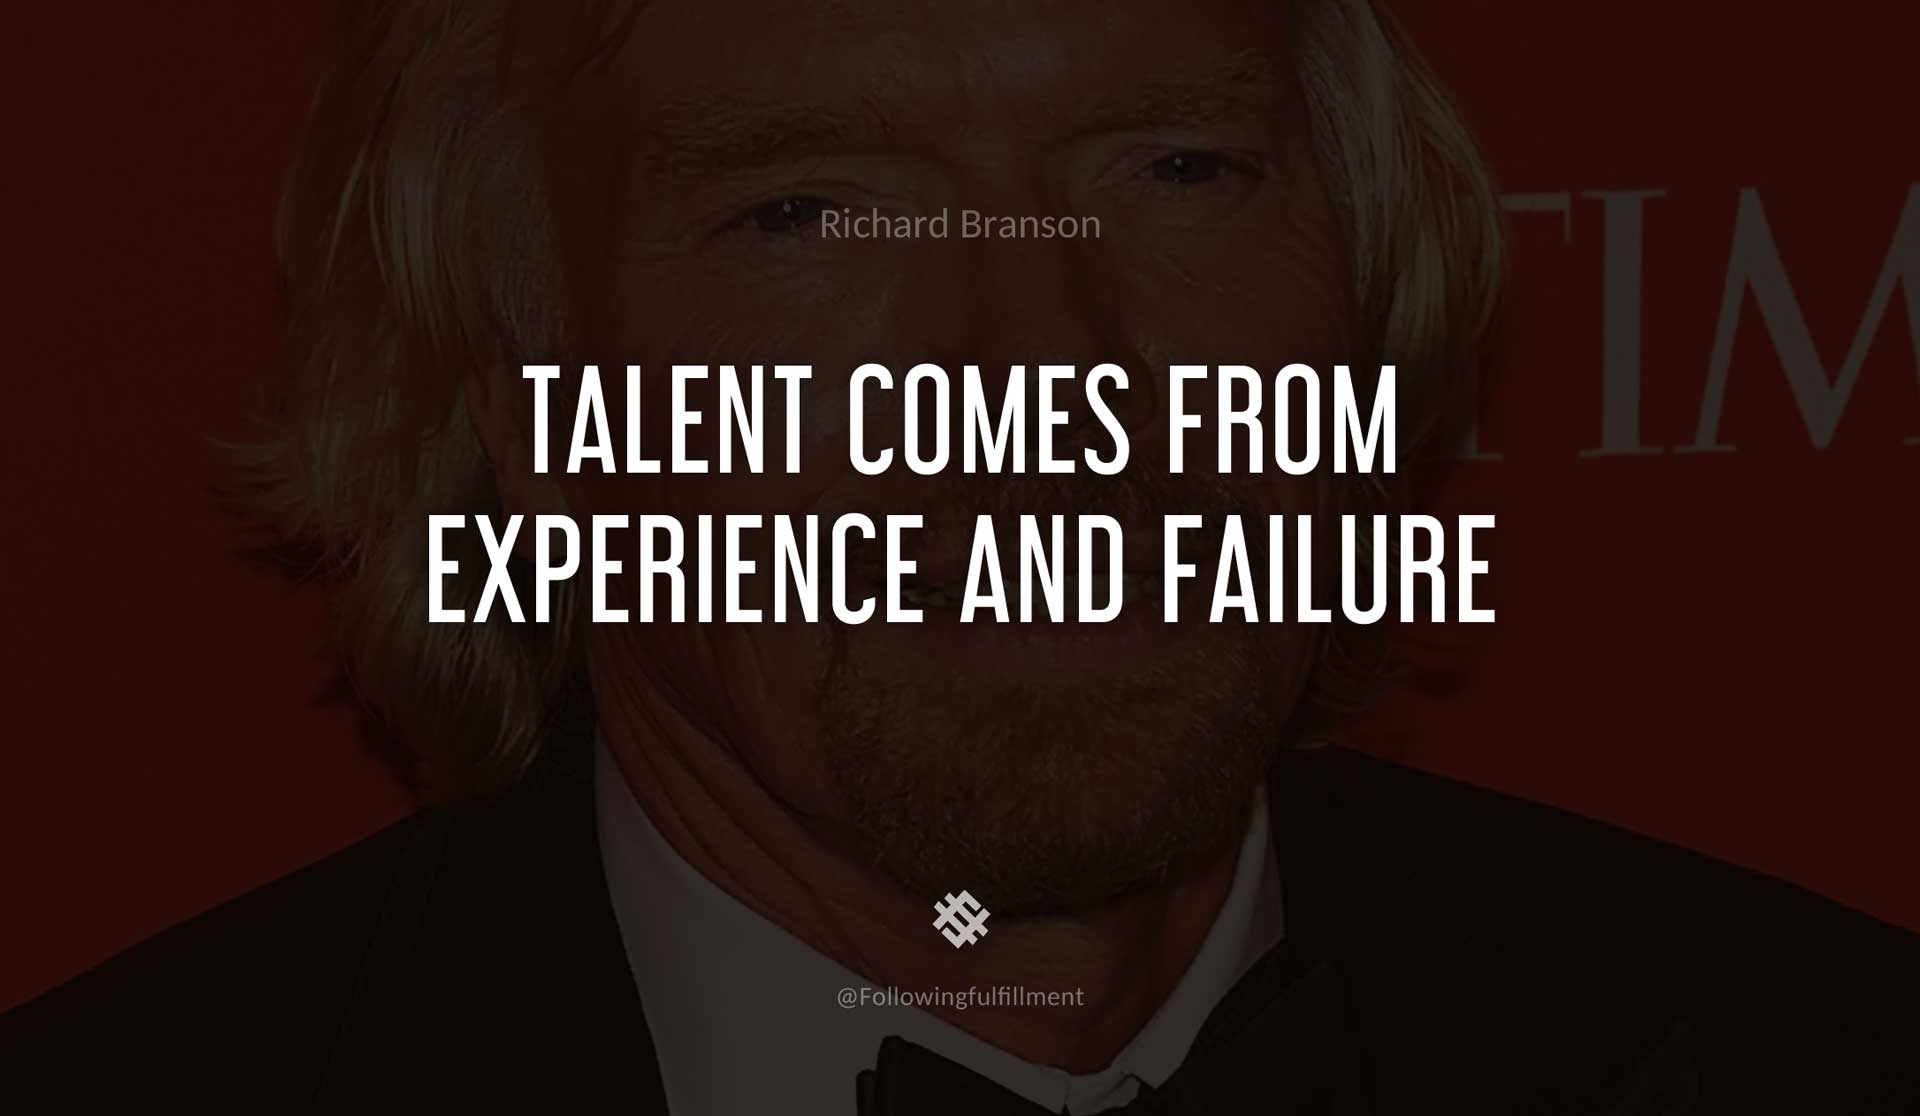 Talent-comes-from-experience-and-failure-RICHARD-BRANSON-Quote.jpg